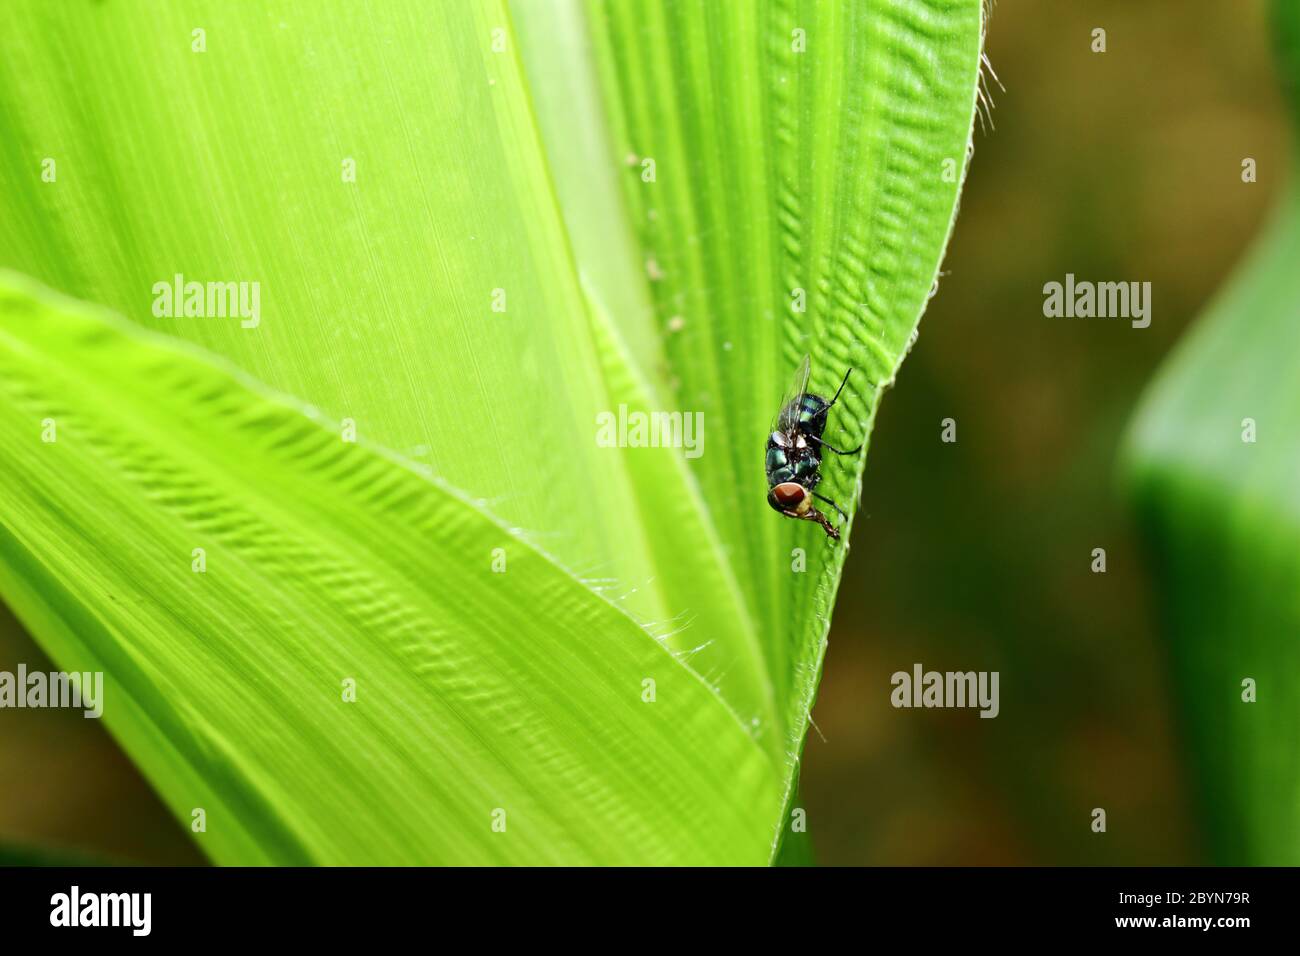 insect on green leaf background texture in nature Stock Photo